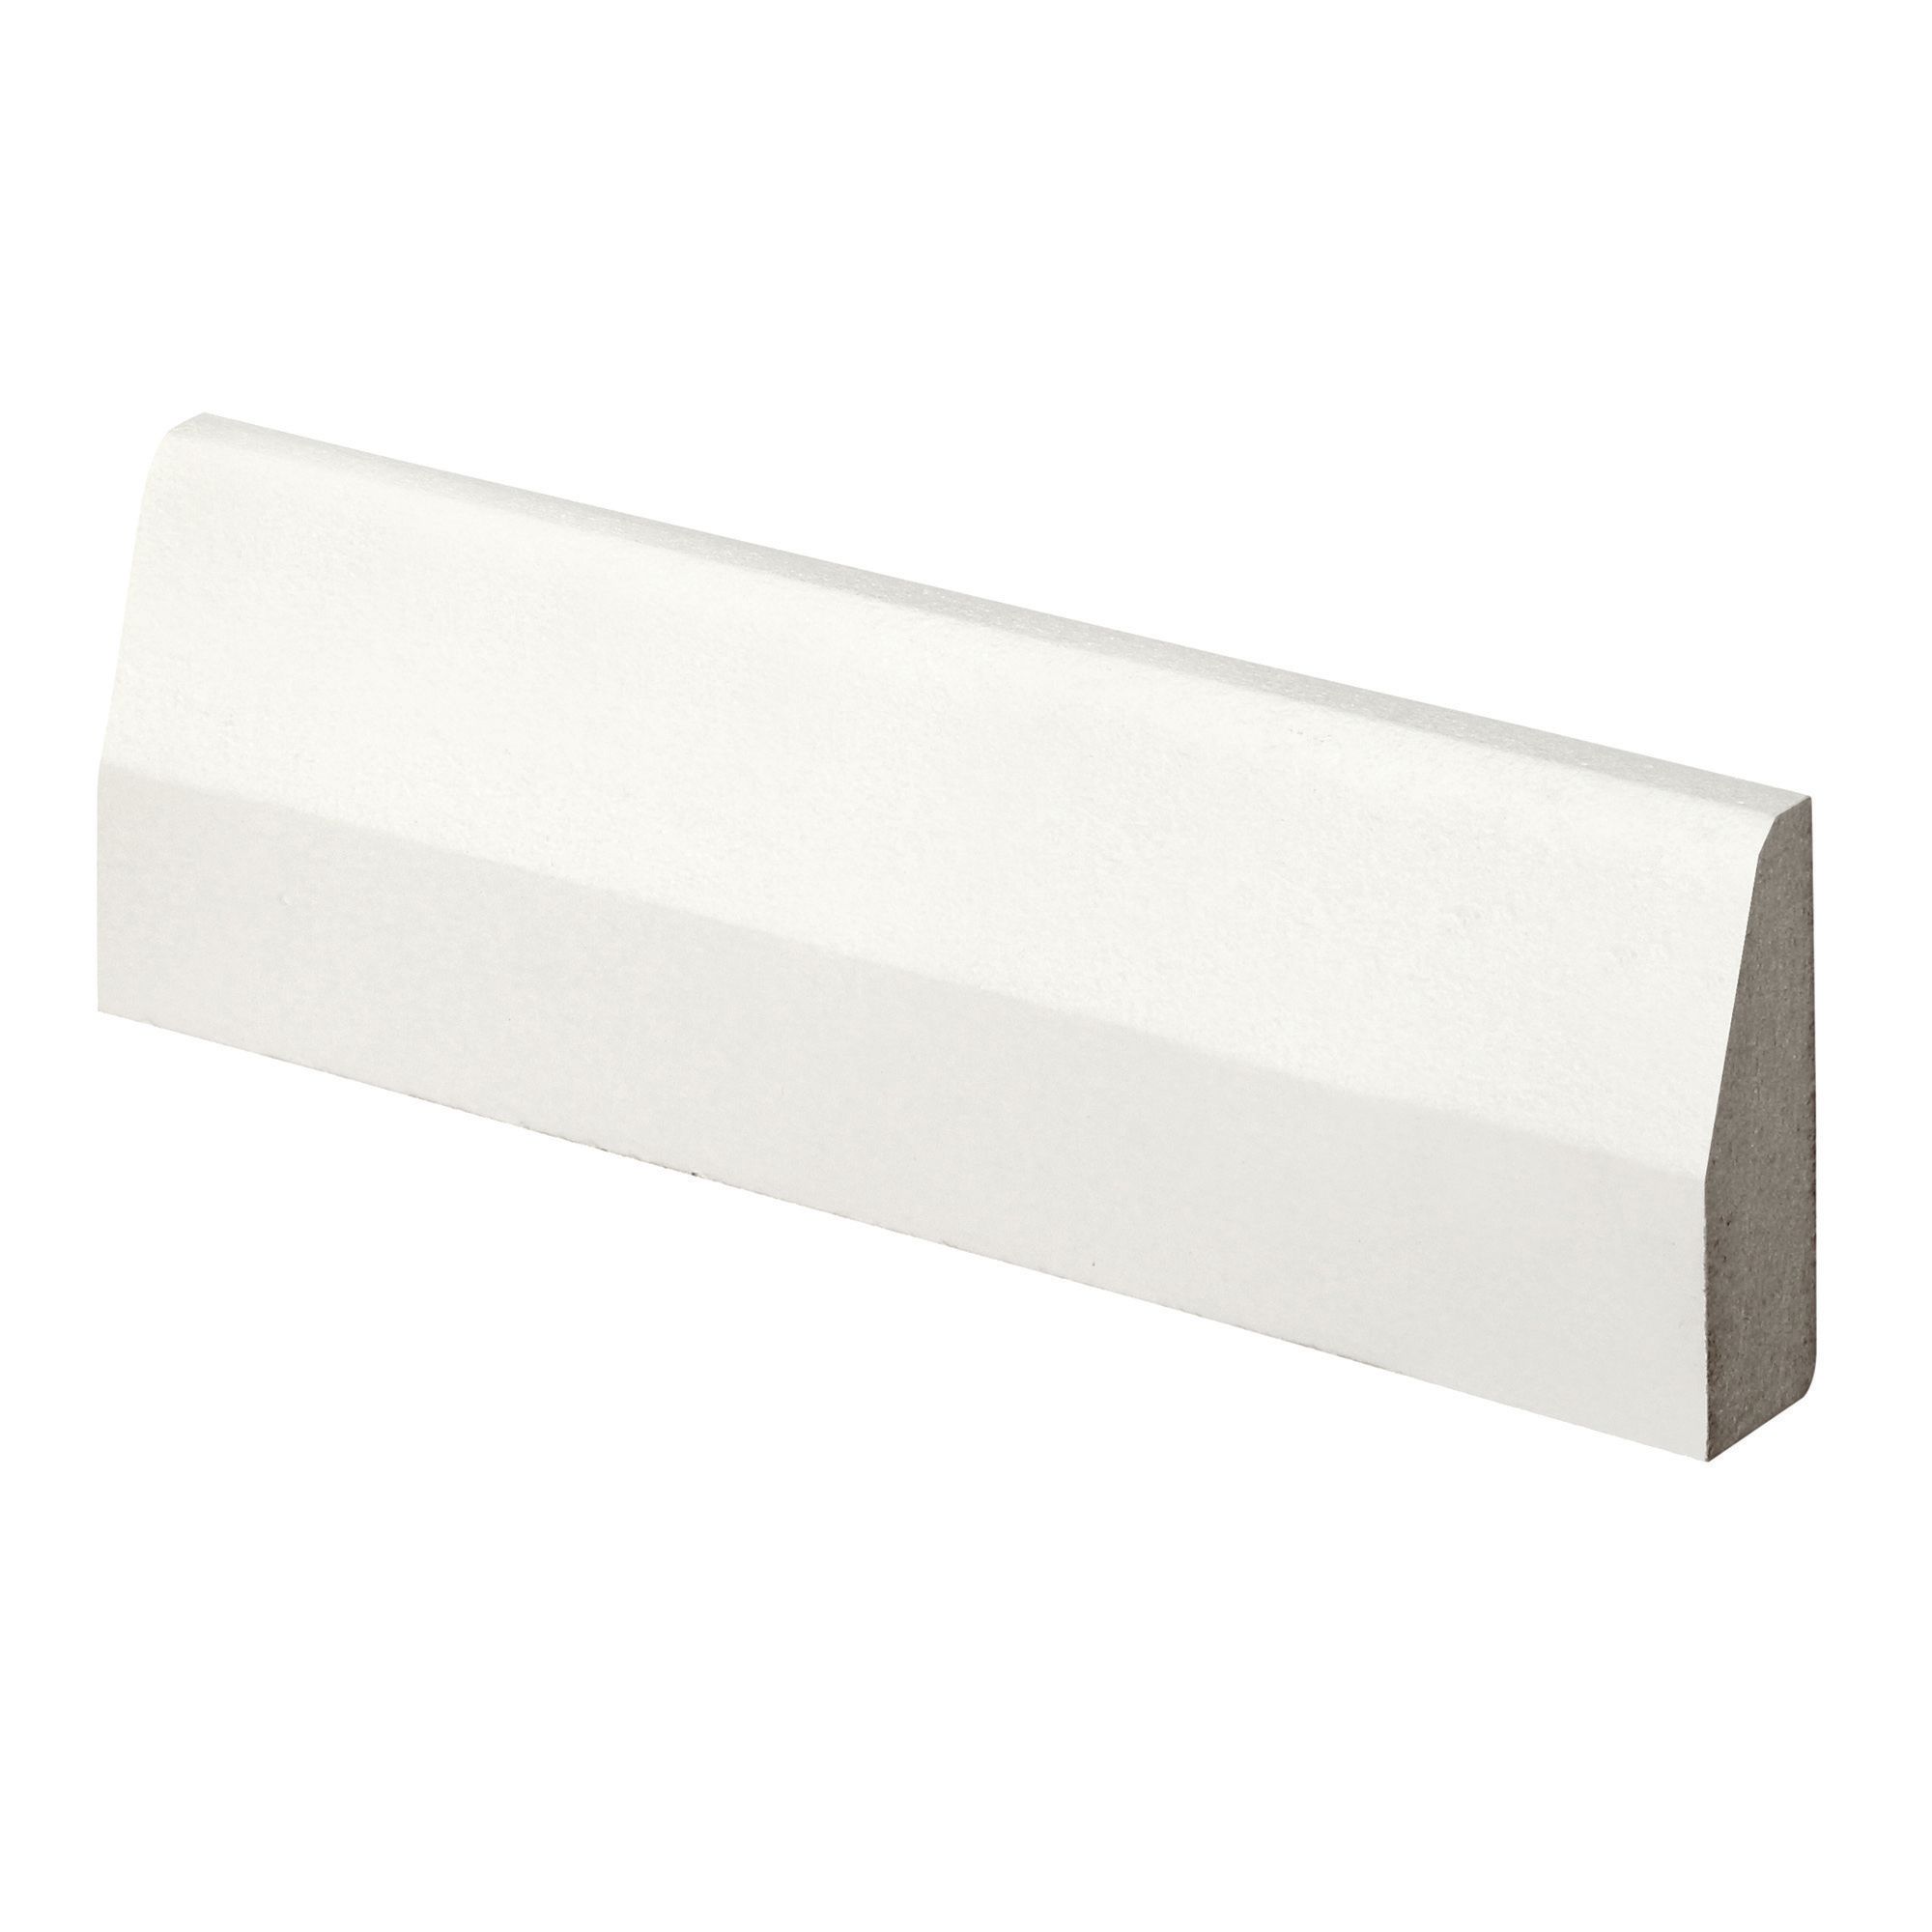 Image of Wickes Chamfered Primed MDF Architrave - 14.5mm x 44mm x 2.1m